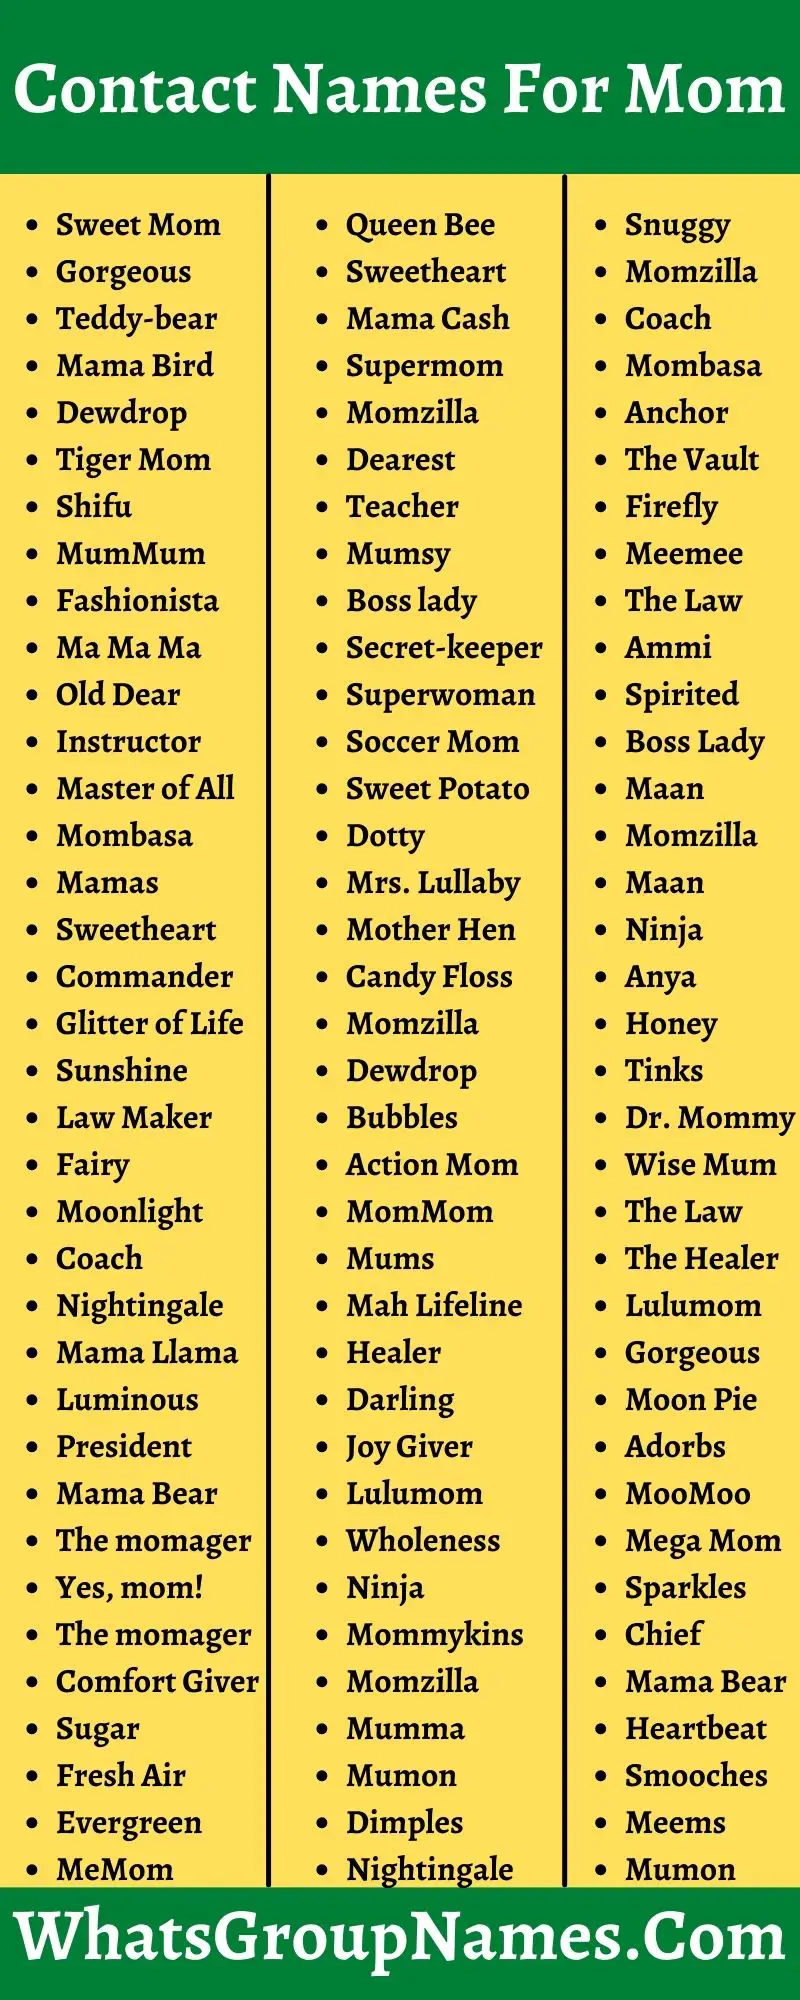 Contact Names For Mom